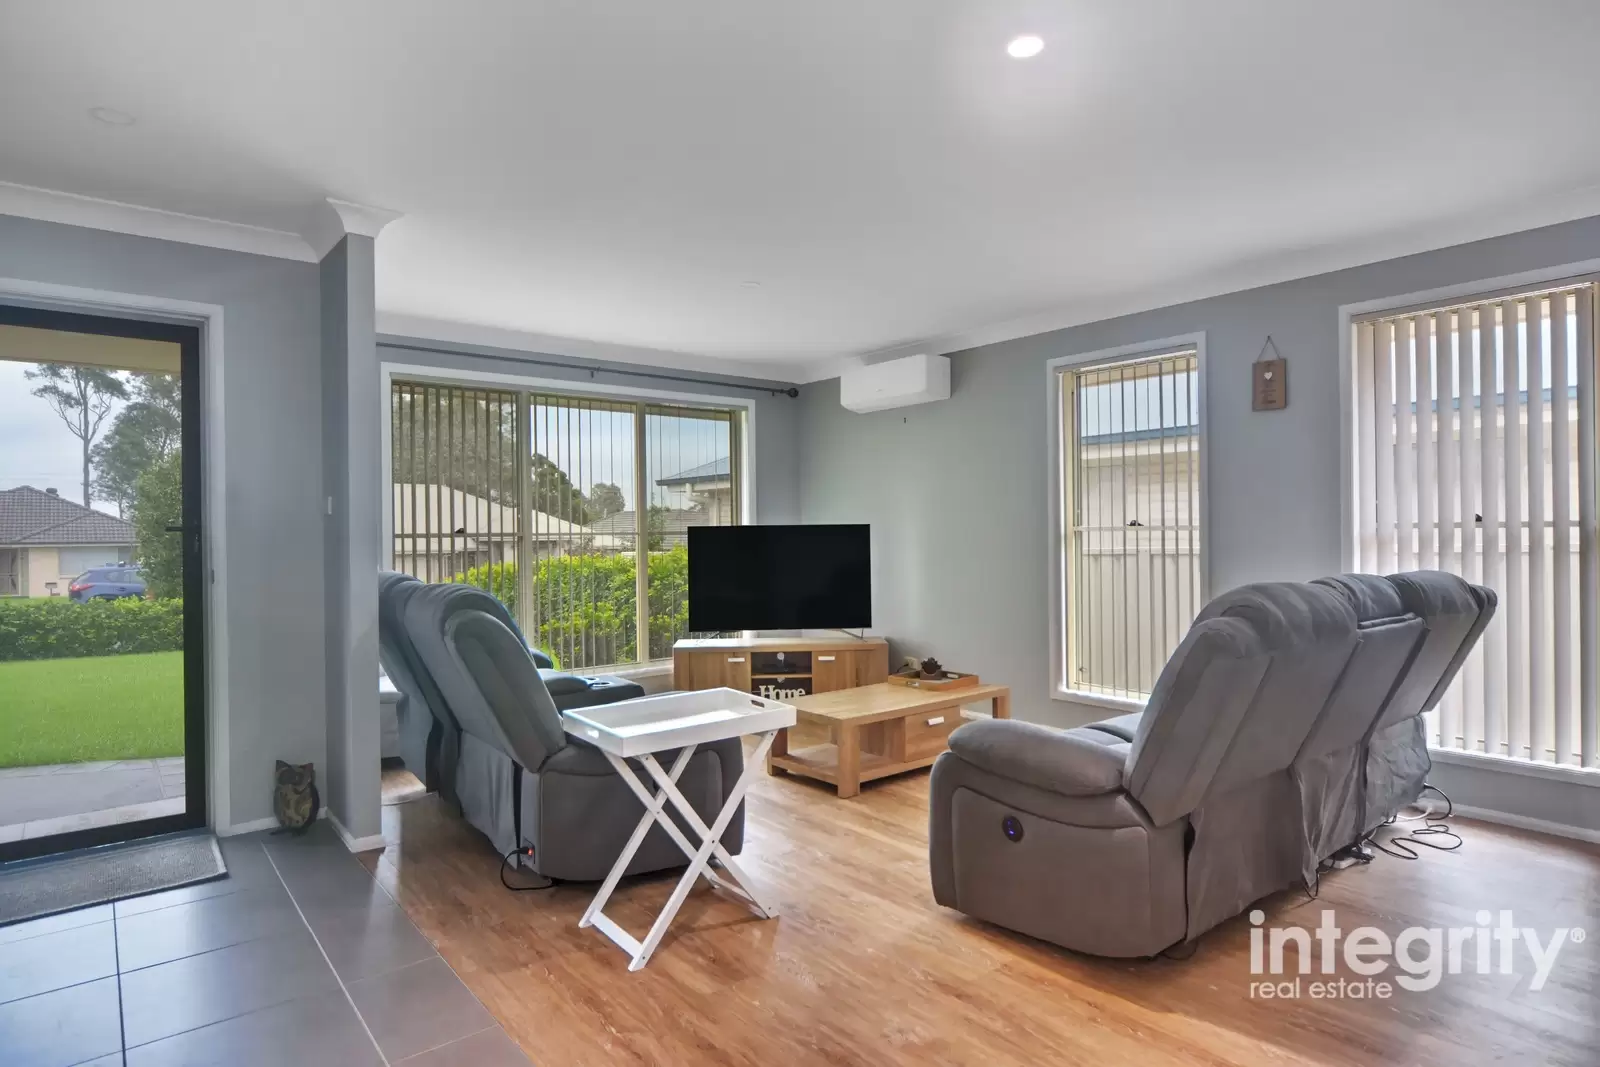 79 Bowerbird Street, South Nowra Sold by Integrity Real Estate - image 2